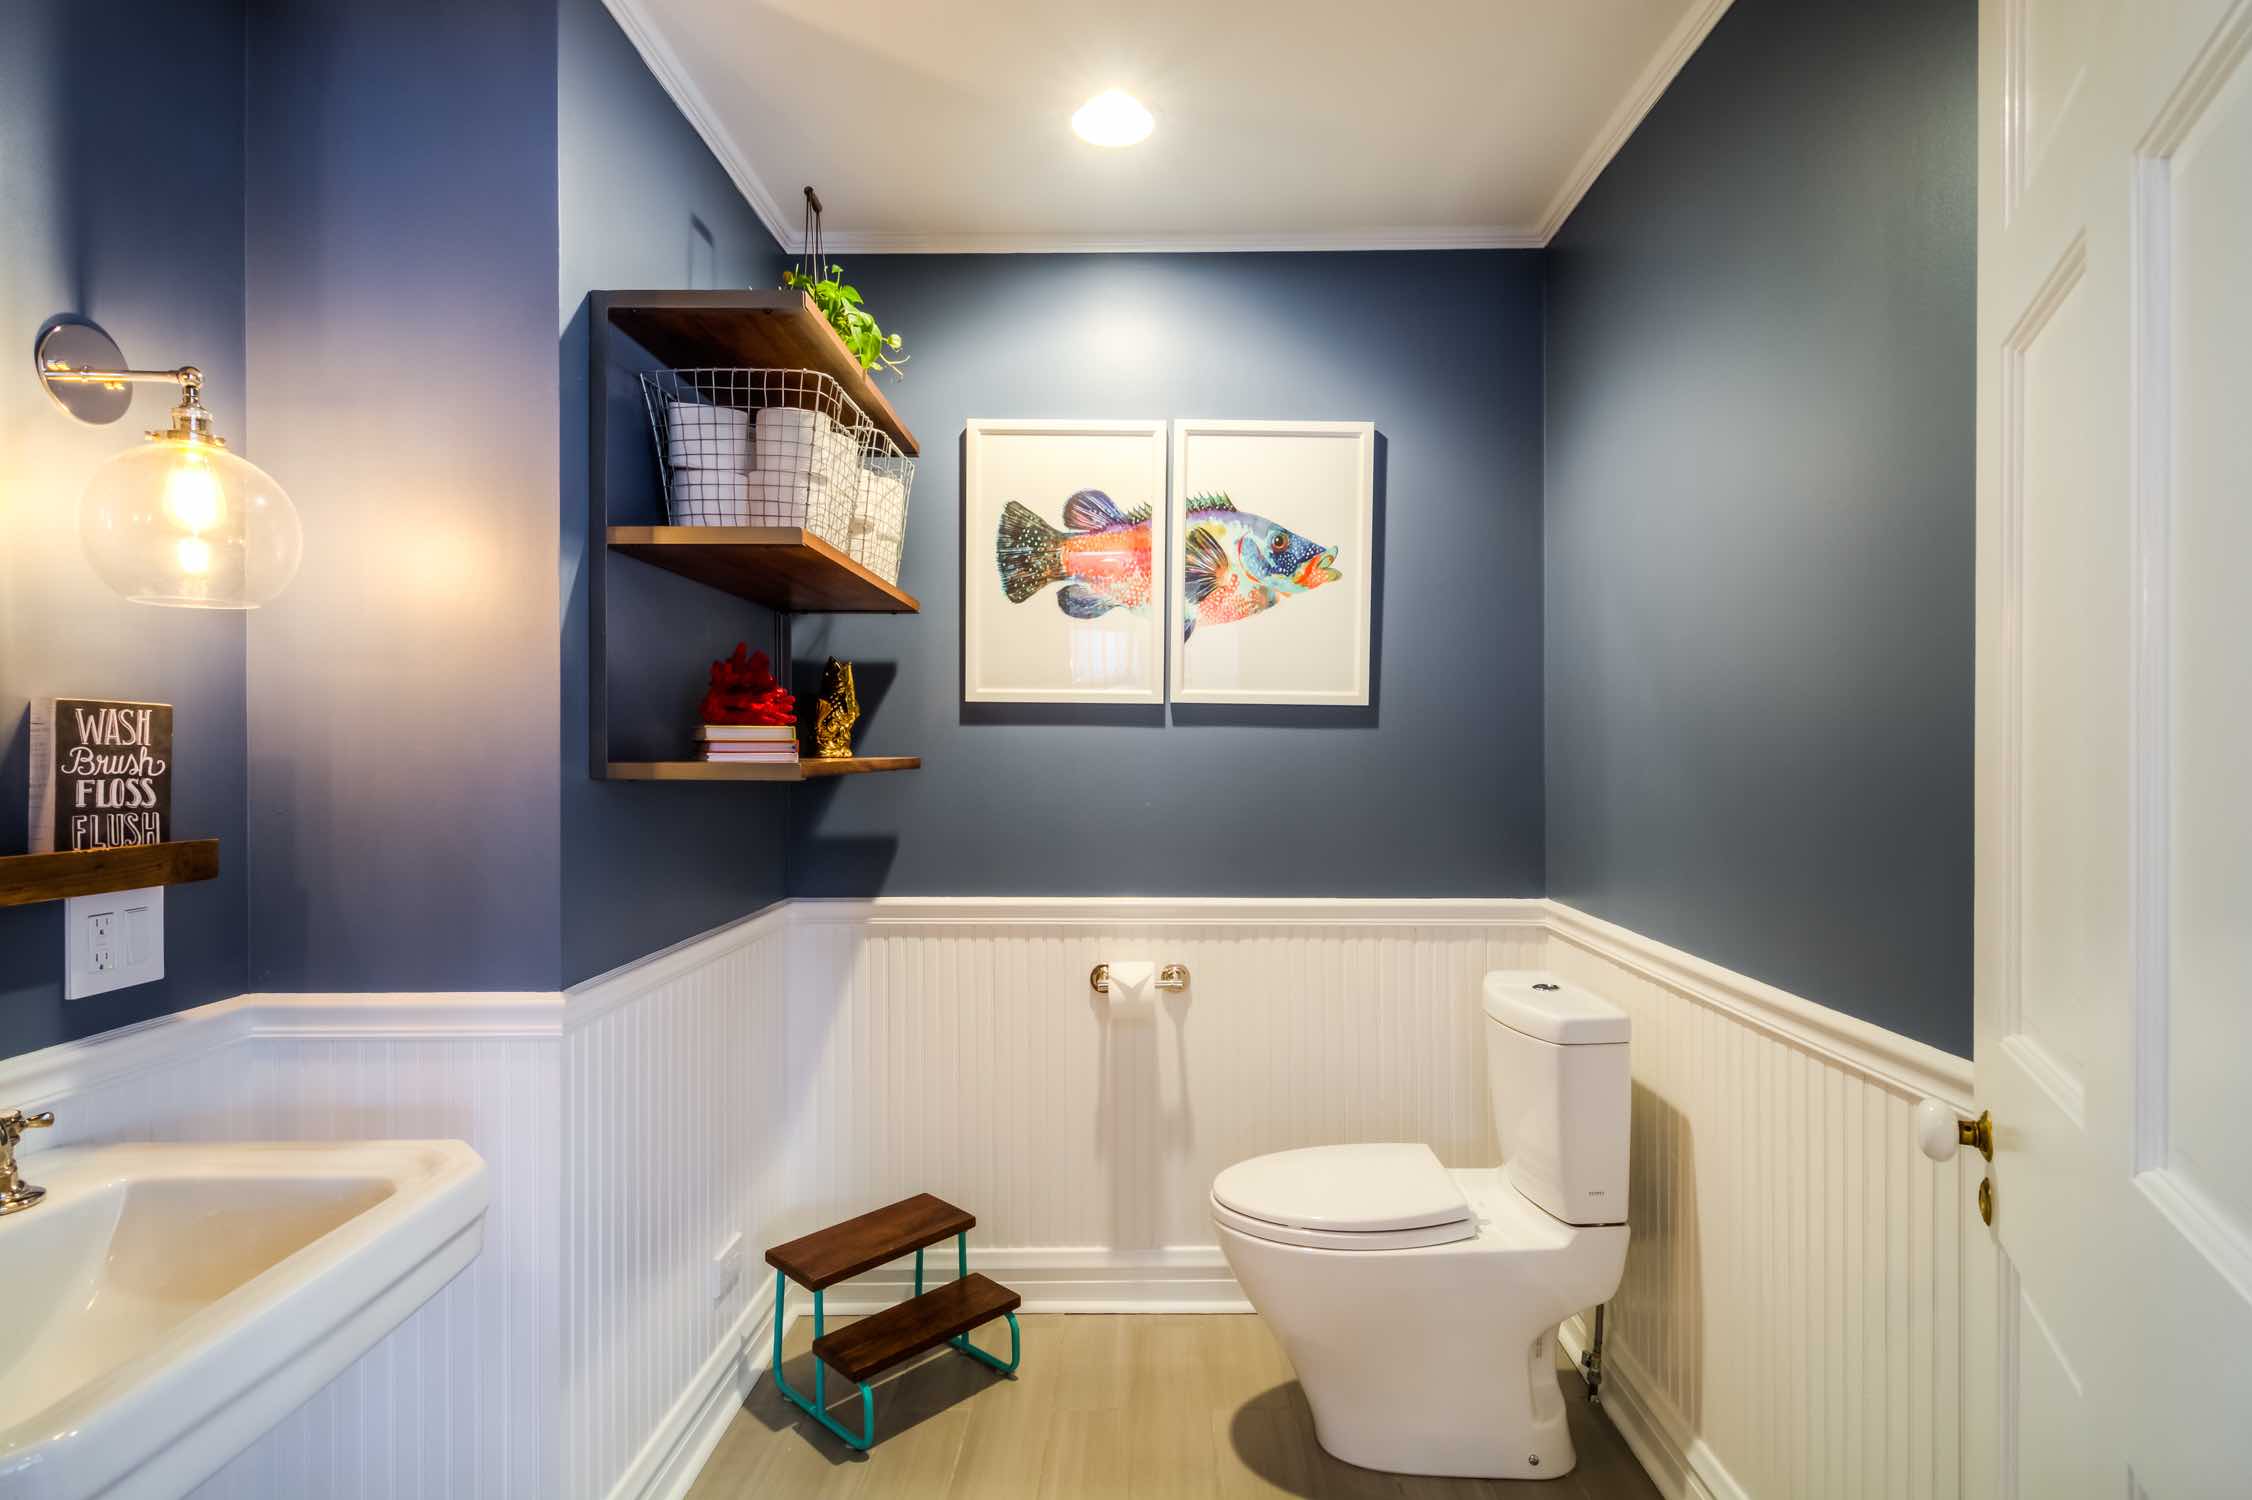 Bathroom tips and tricks from Havenly designer Ann F.